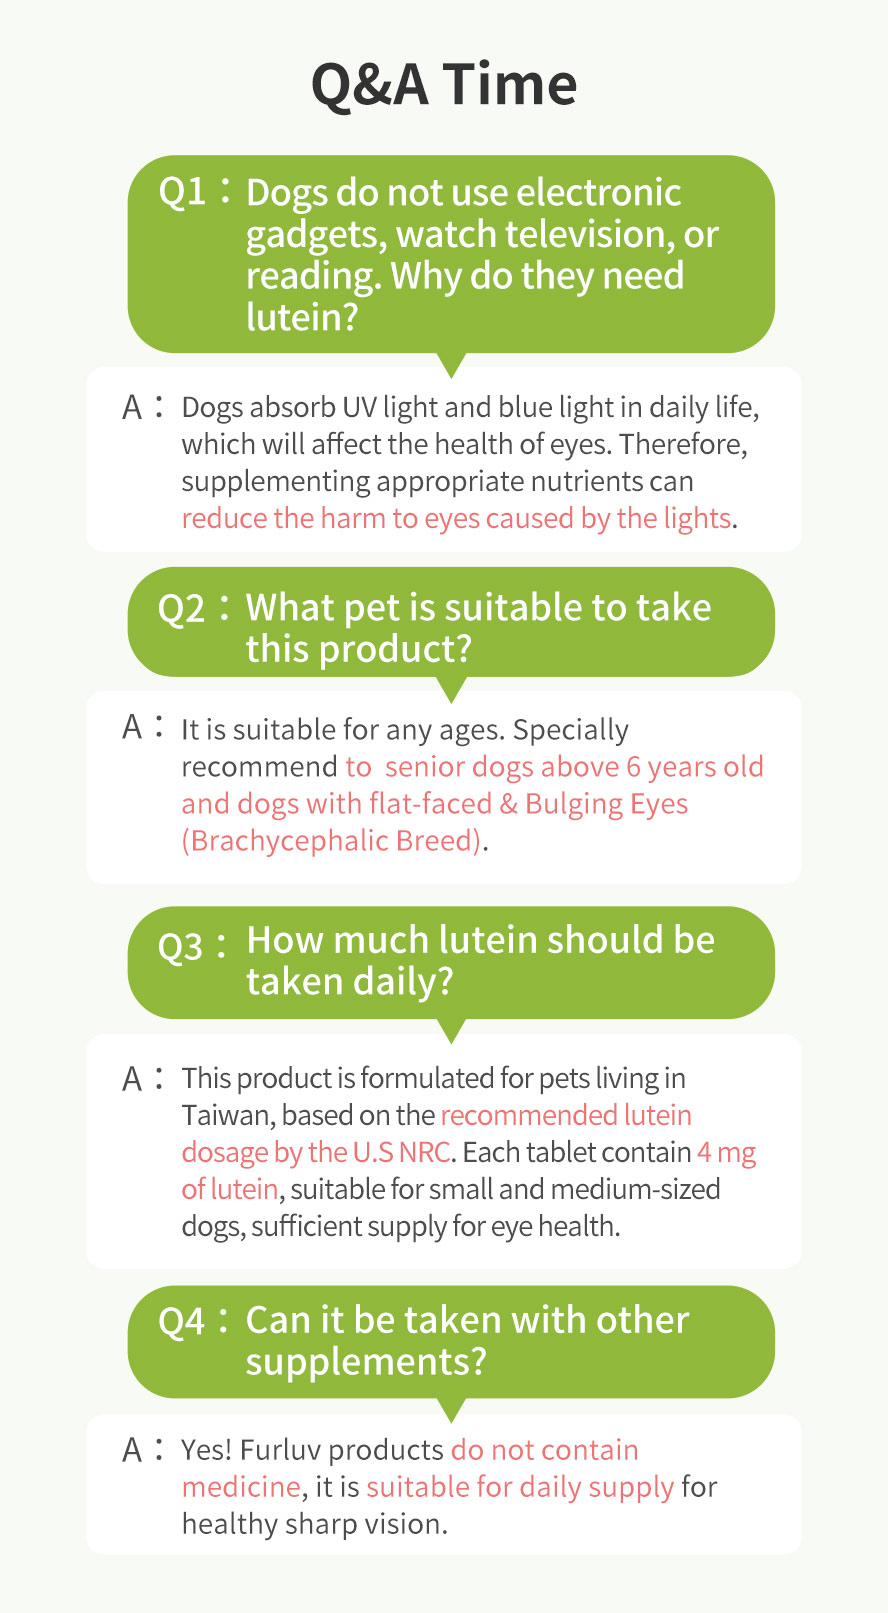 Furluv Eye Health for Dogs is suitable for all-ages and they do get harm to eyes caused by UV light or blue light